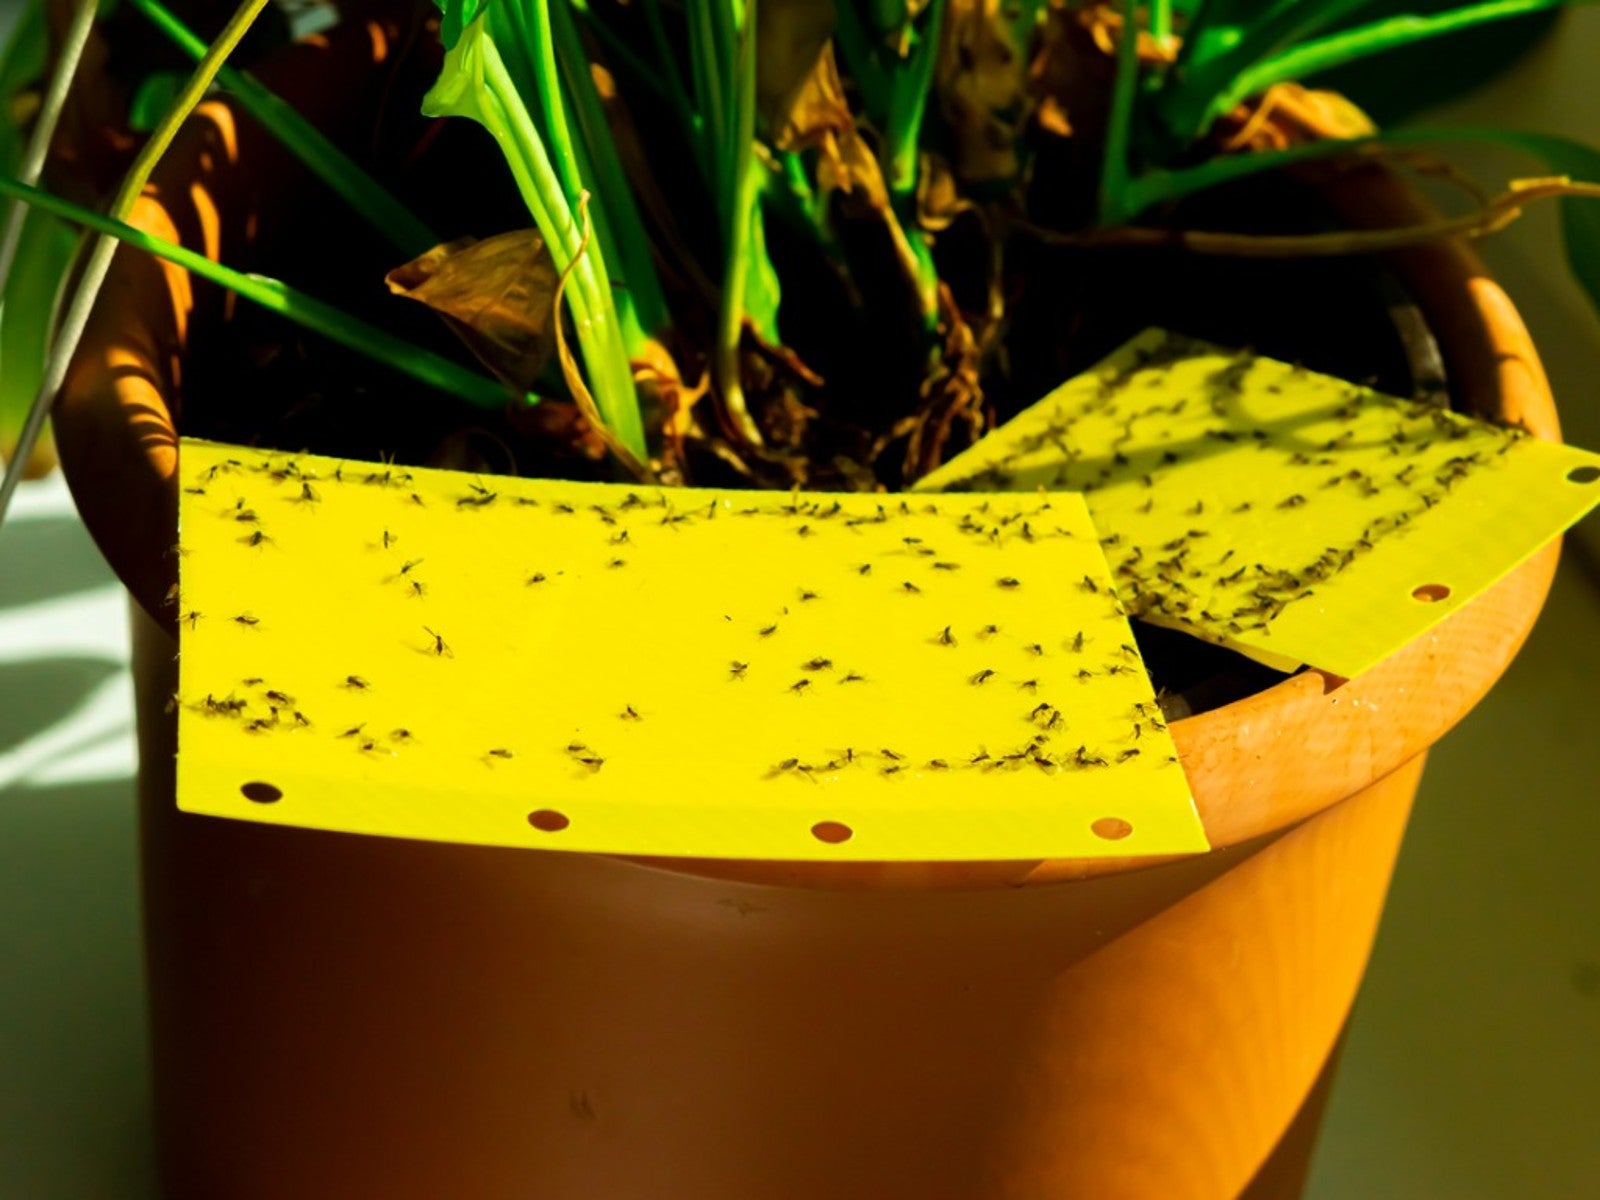 How To Control Fungus Gnats On House Plants - Gardening